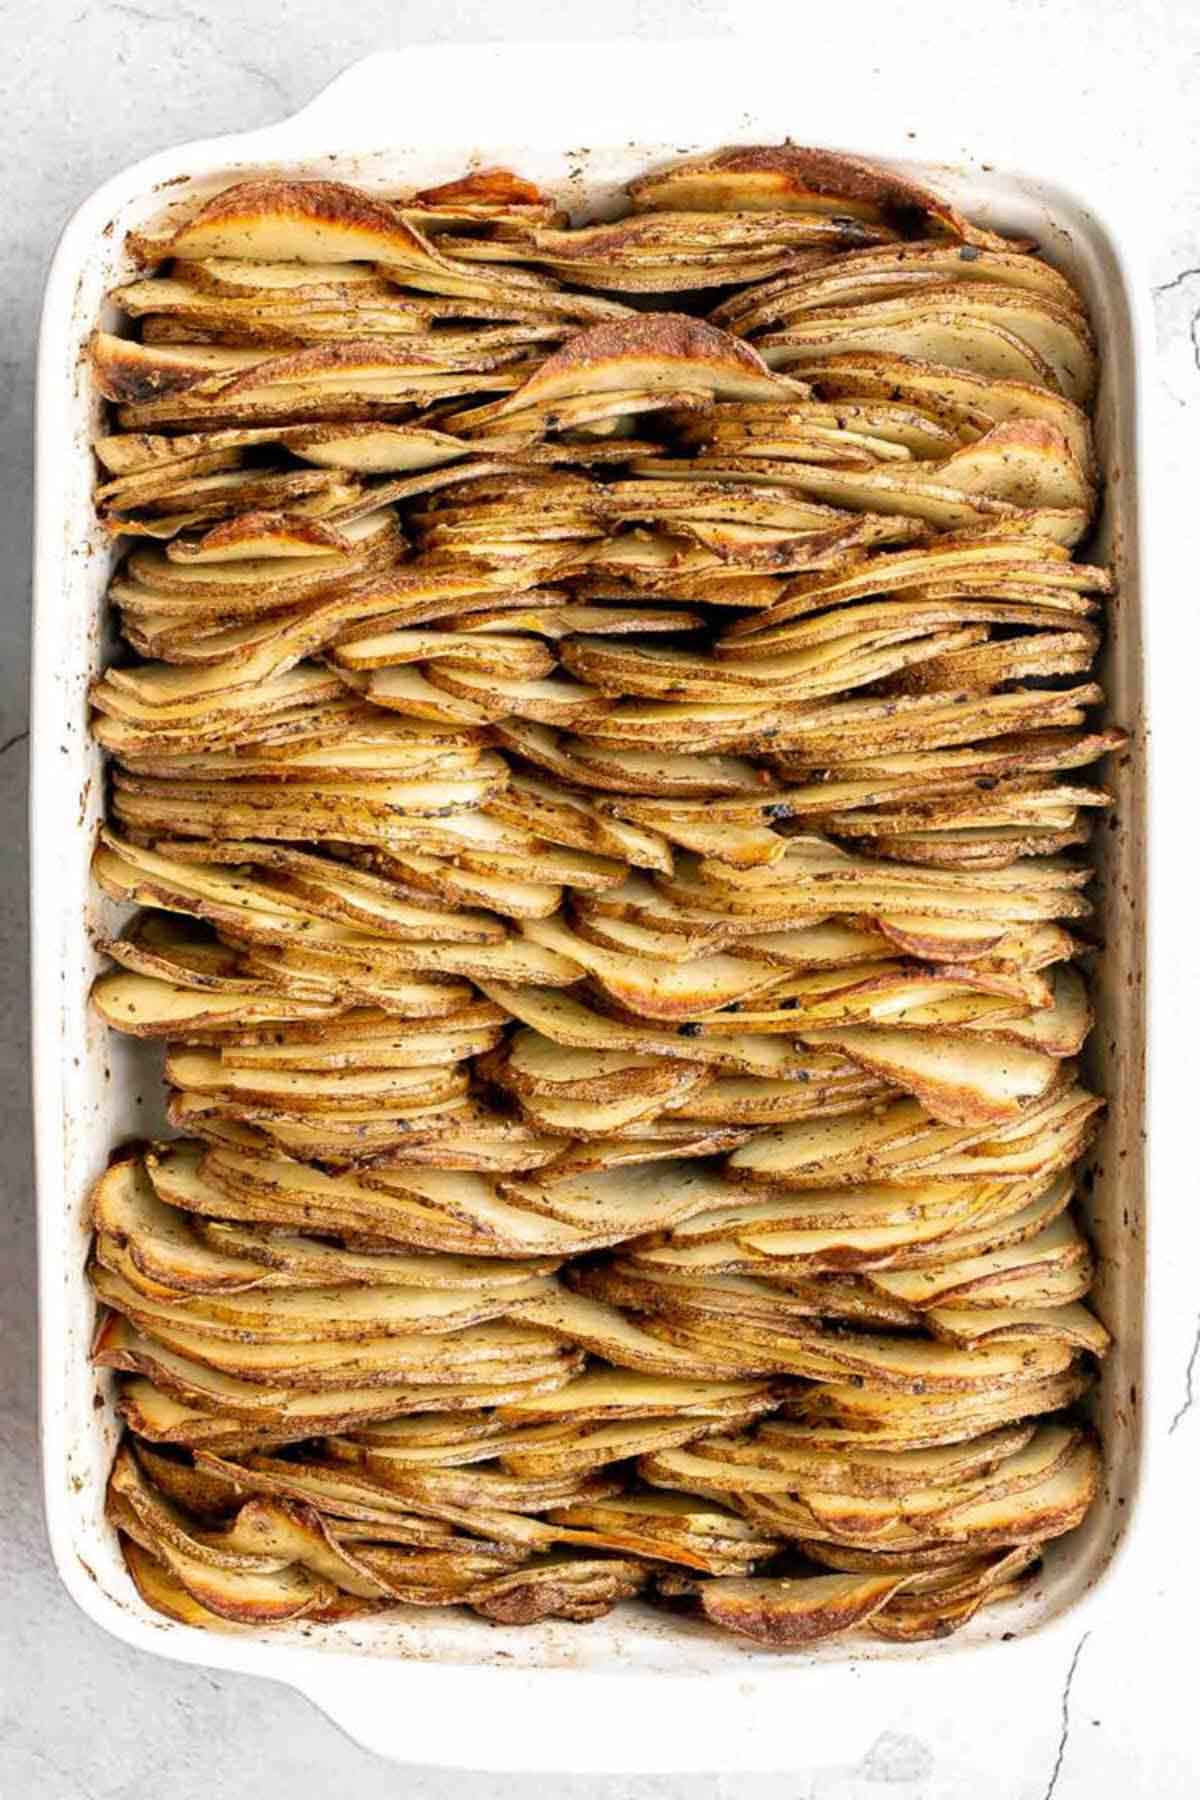 tight layers of thinly sliced potatoes in a baking dish.